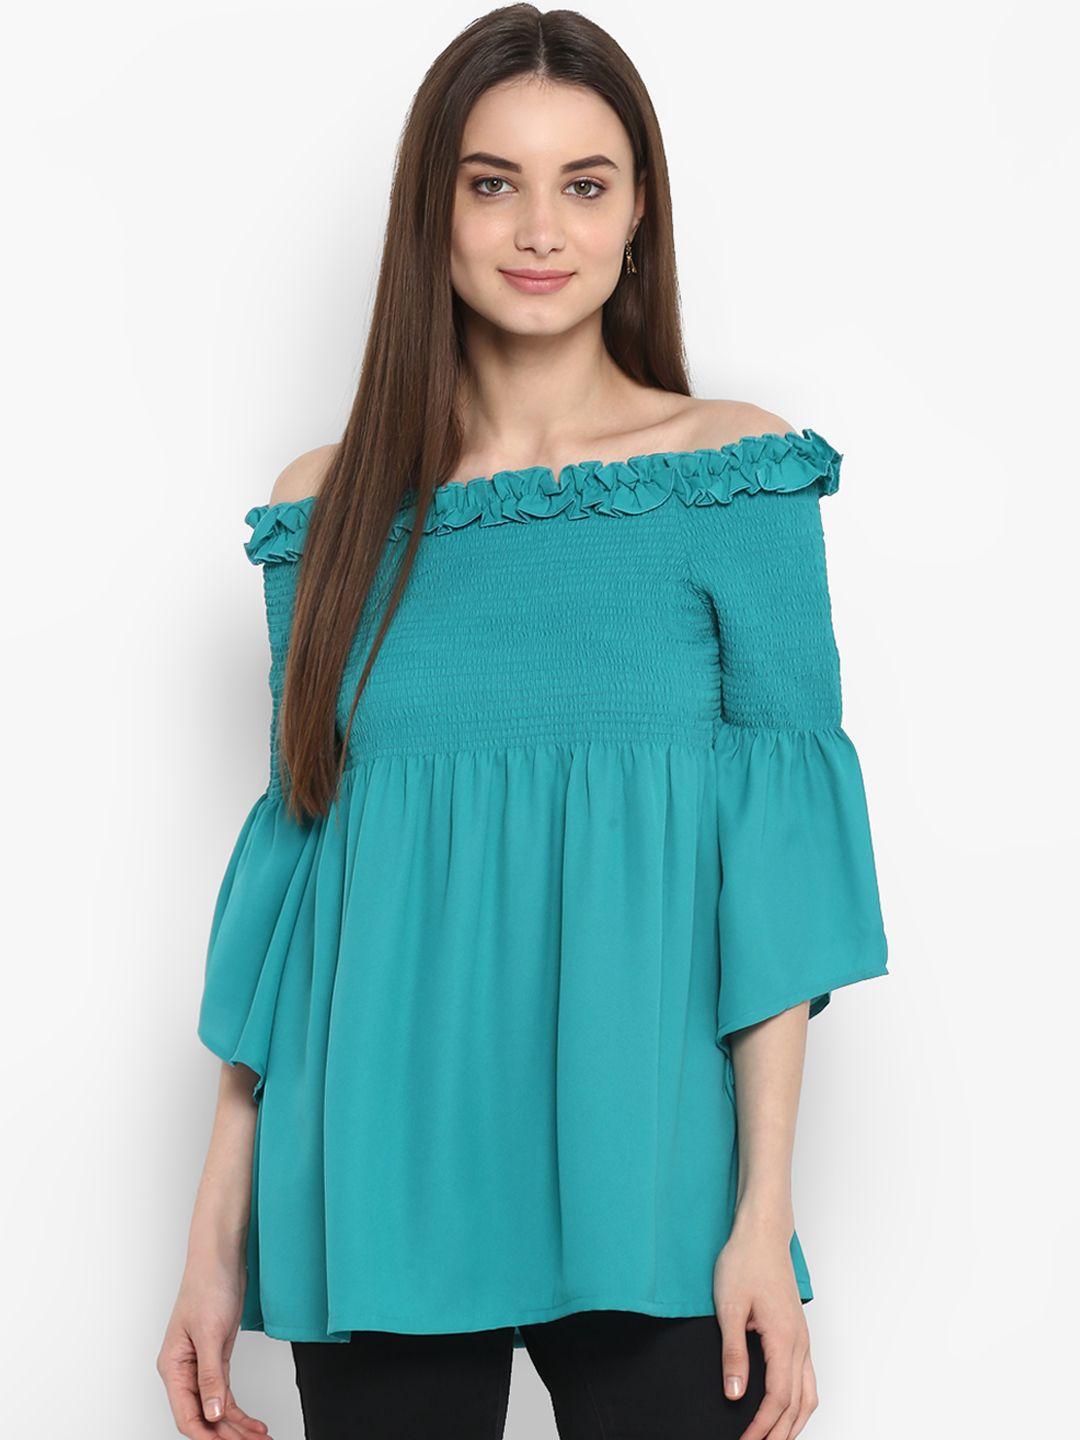 stylestone-women-teal-solid-fitted-top